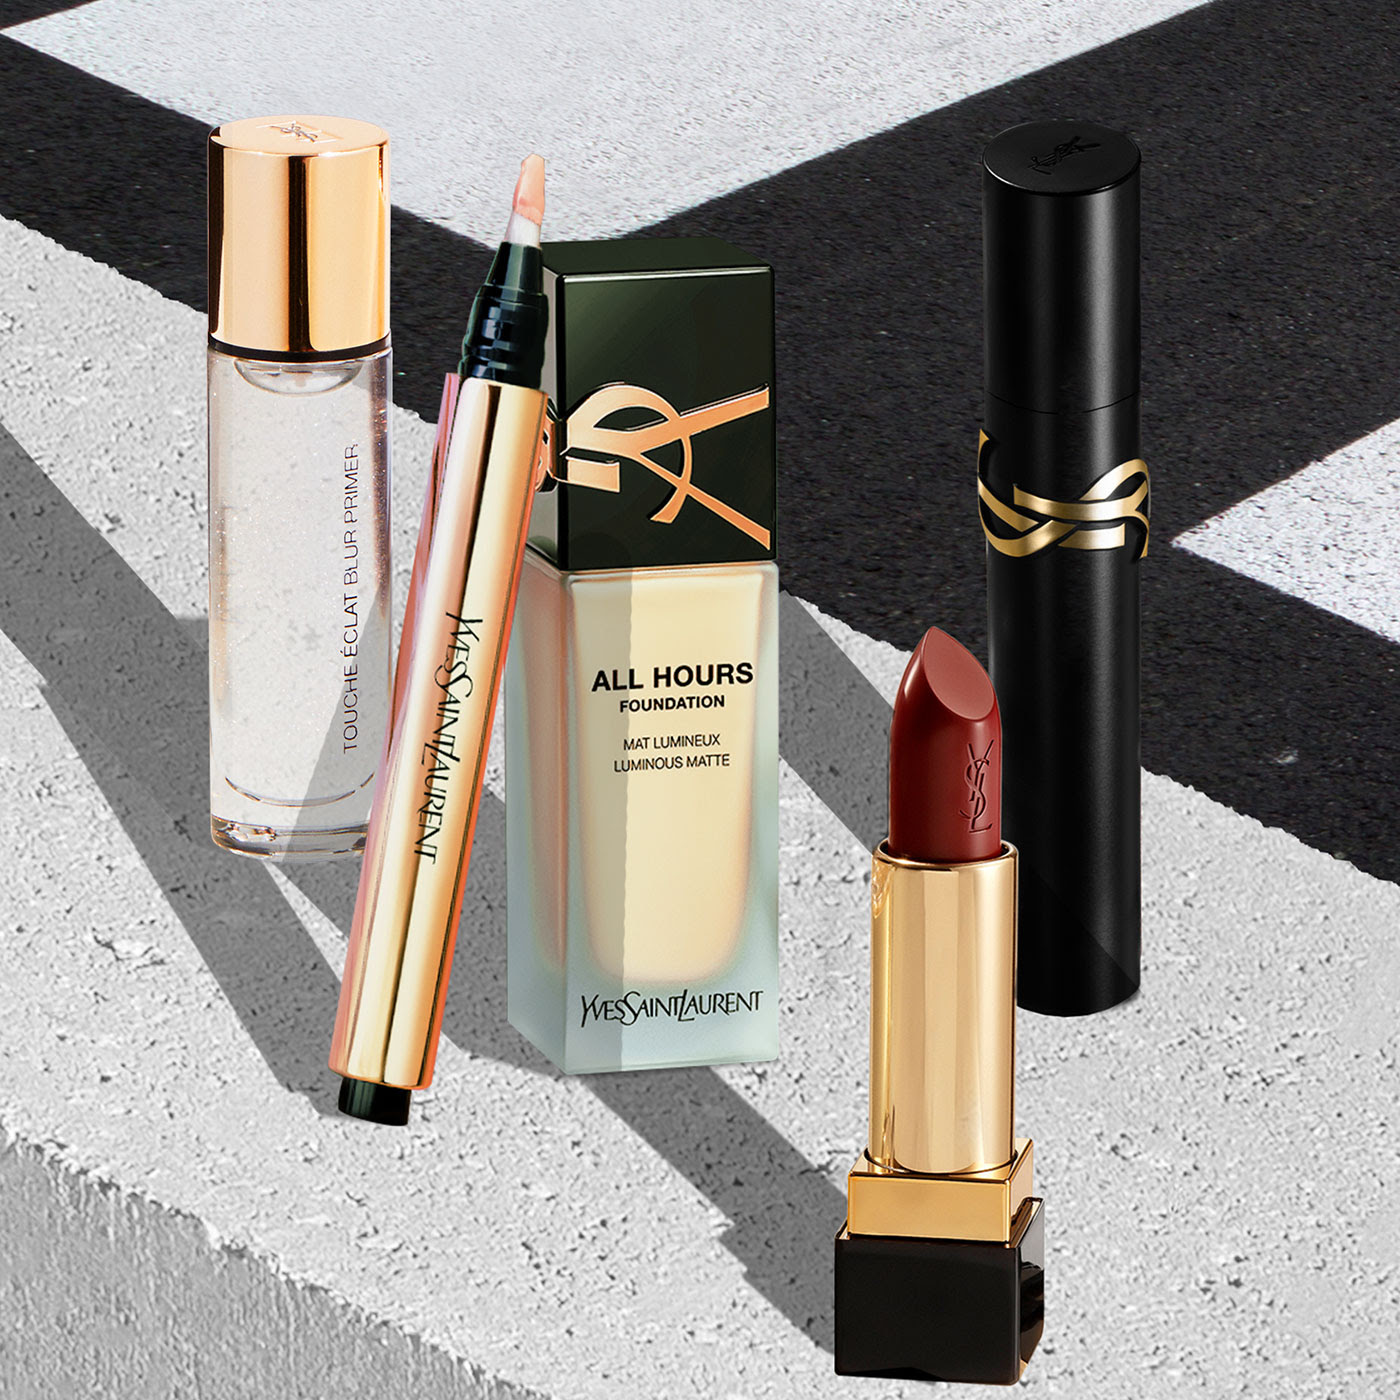 20% off selected makeup at YSL Beauty